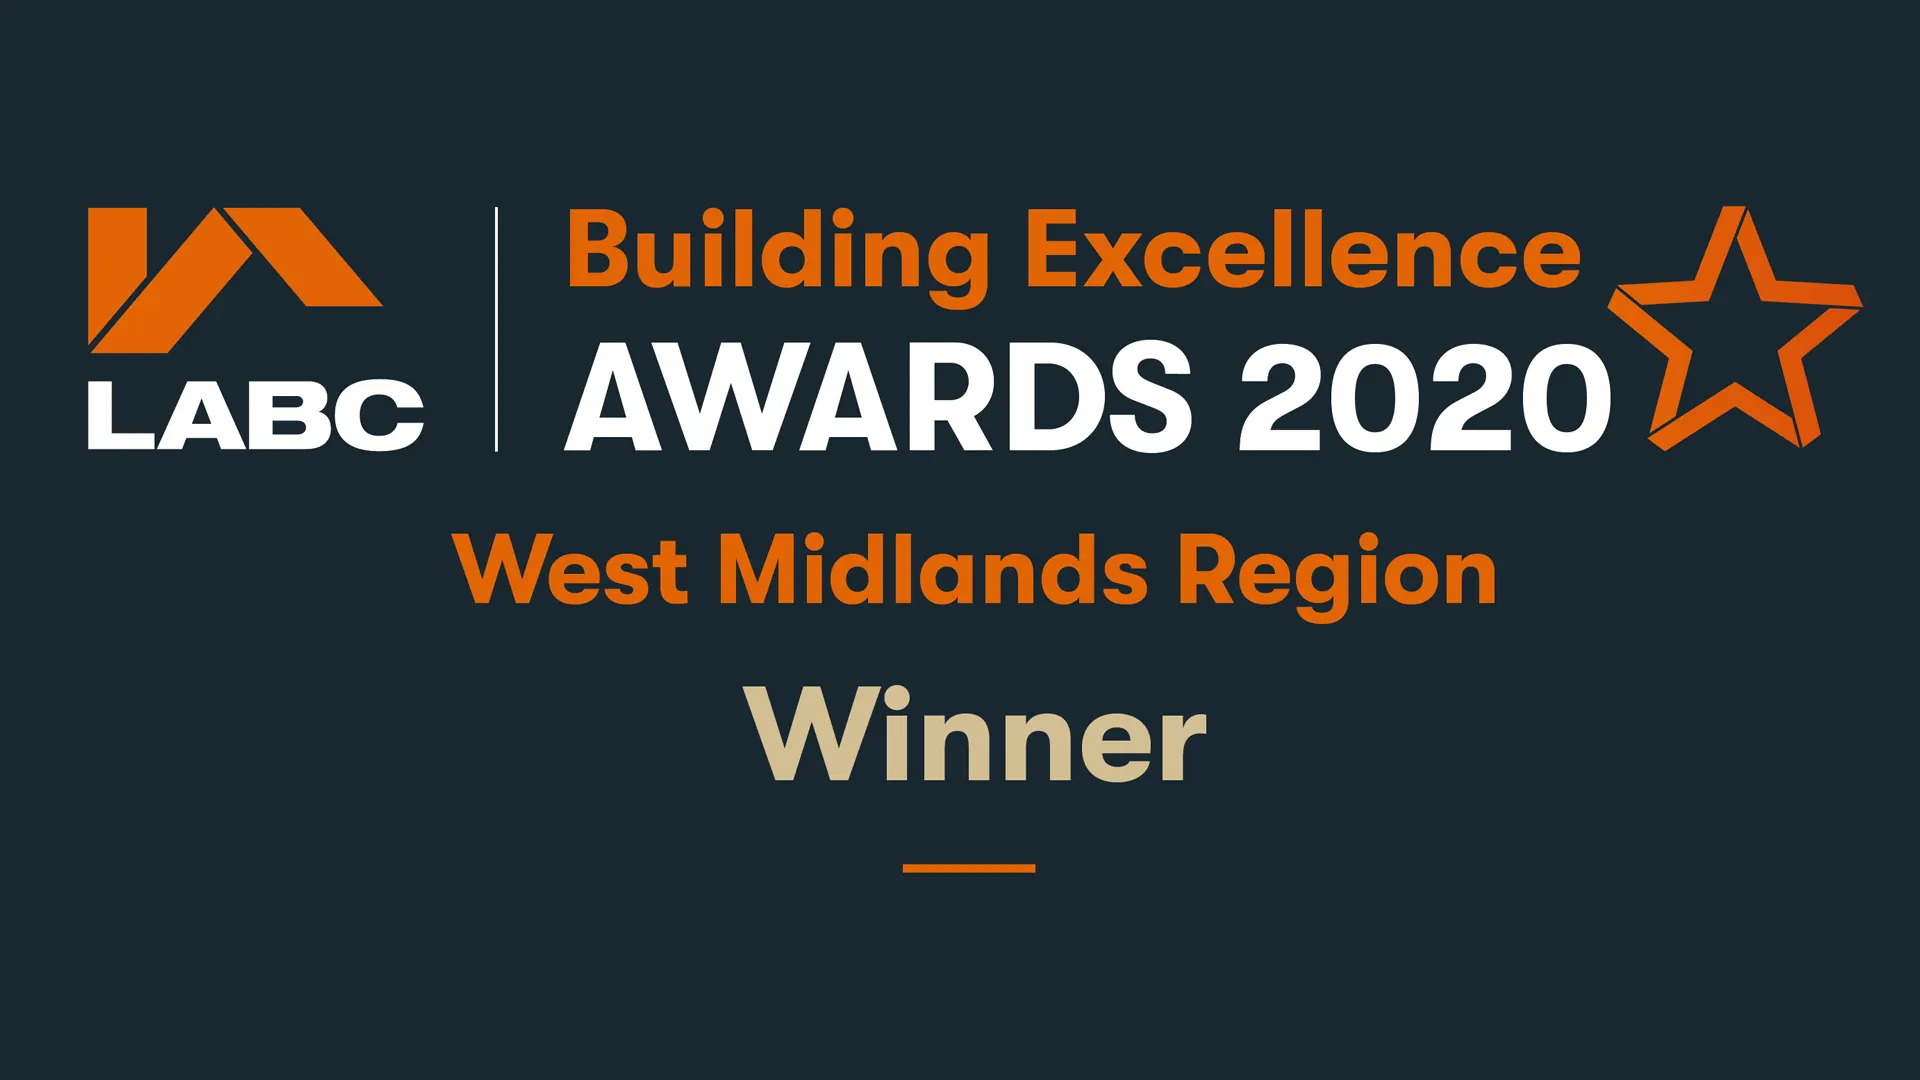 Broughton Hall Estates are delighted to have been awarded the Best Small New Housing Development award at the Building Excellence Awards 2020.